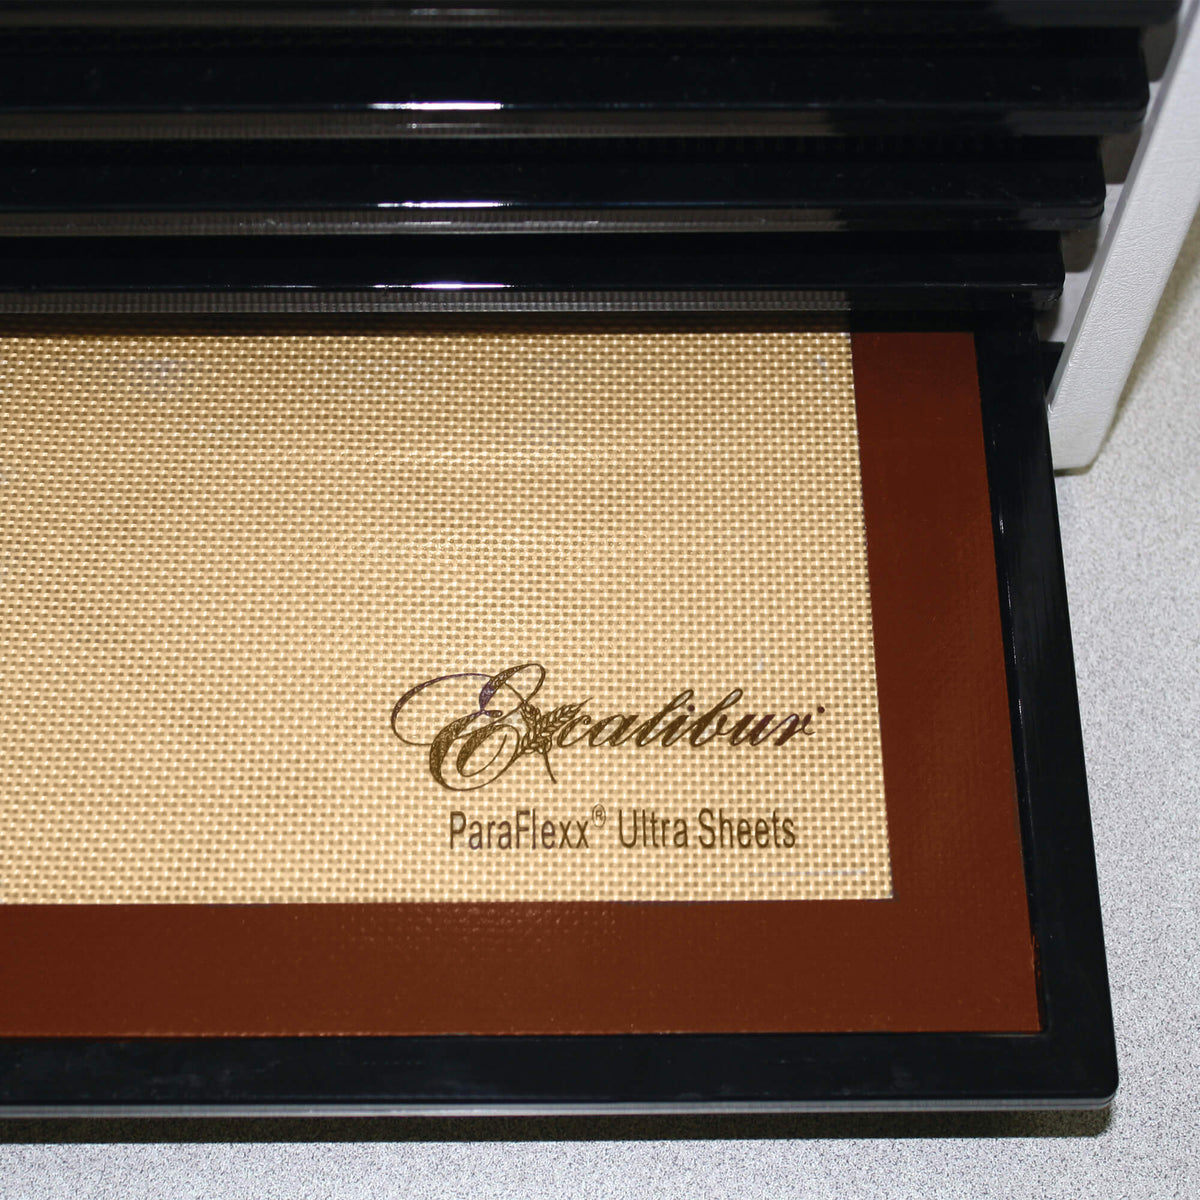 Excalibur Paraflexx Ultra silicone dehydrator drying sheet on a tray.